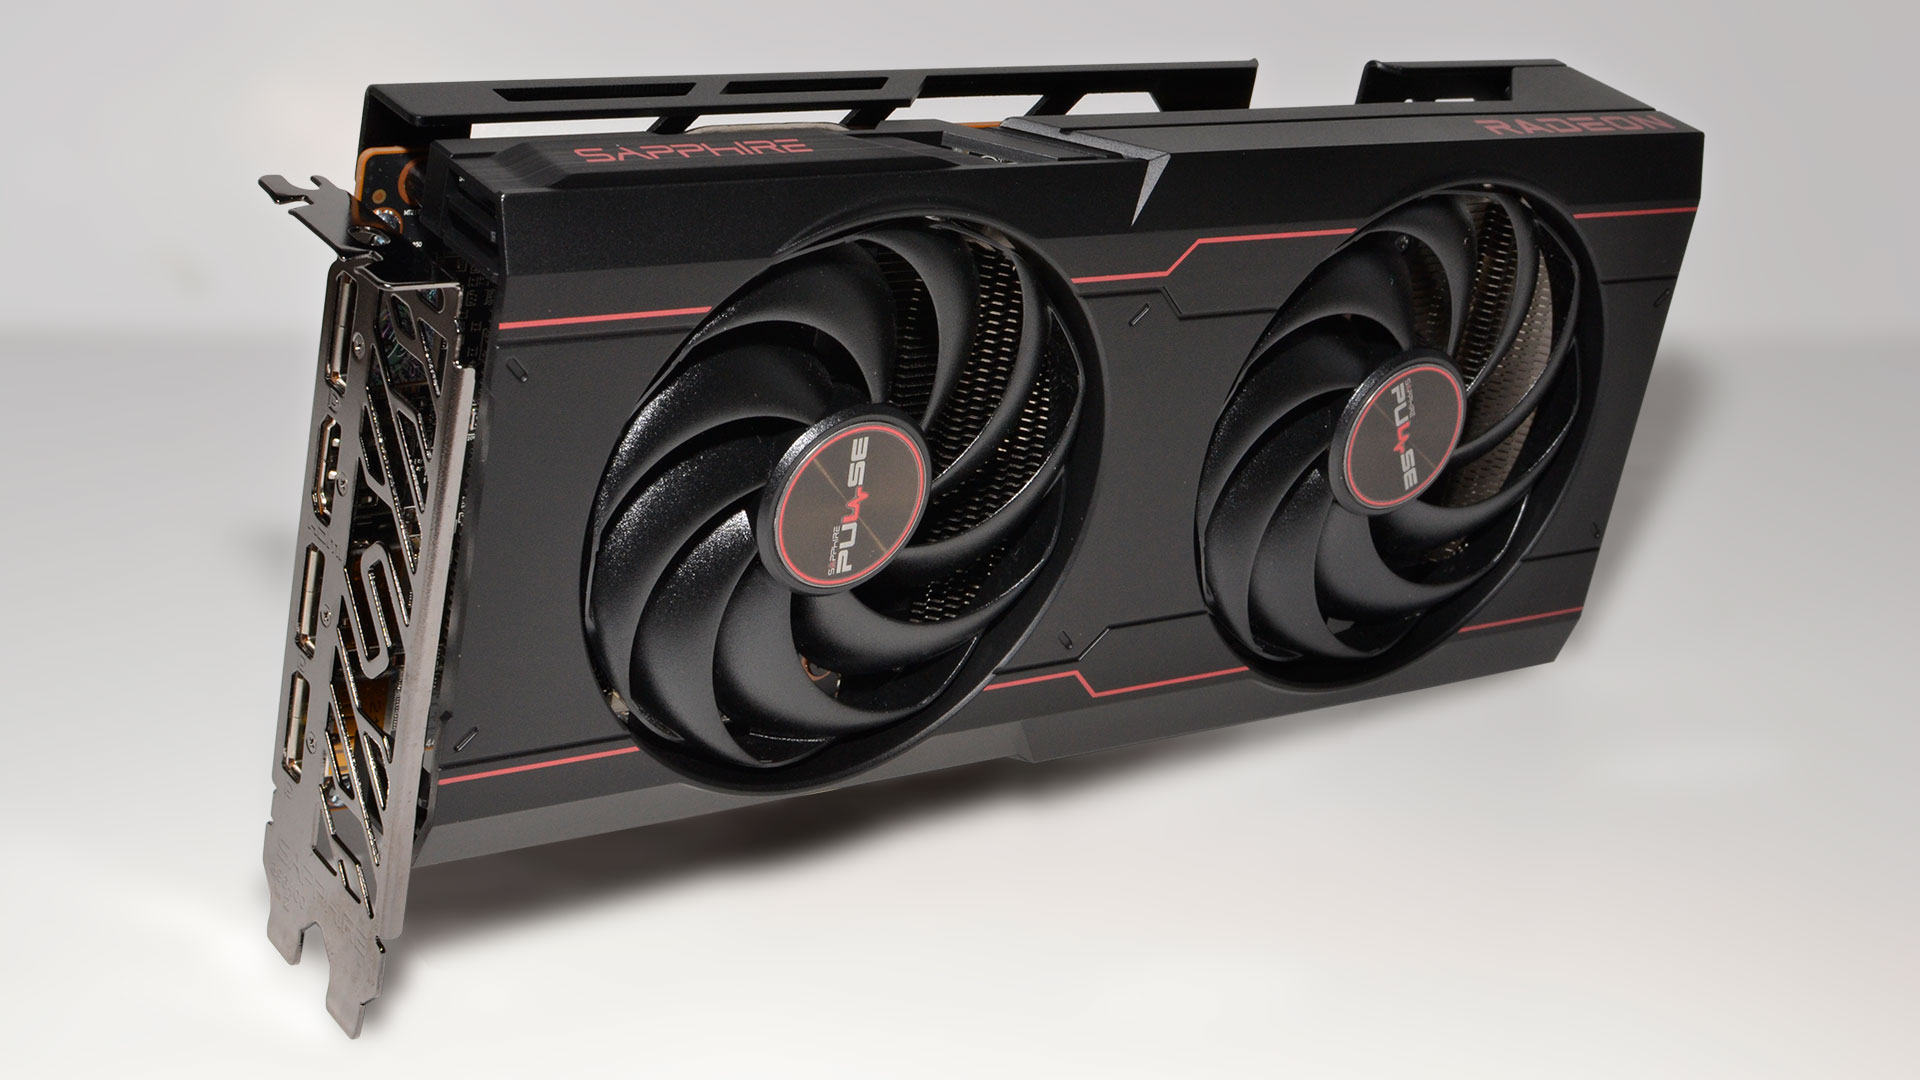 Sapphire Radeon RX 6600 XT Pulse Design and Features - Sapphire 